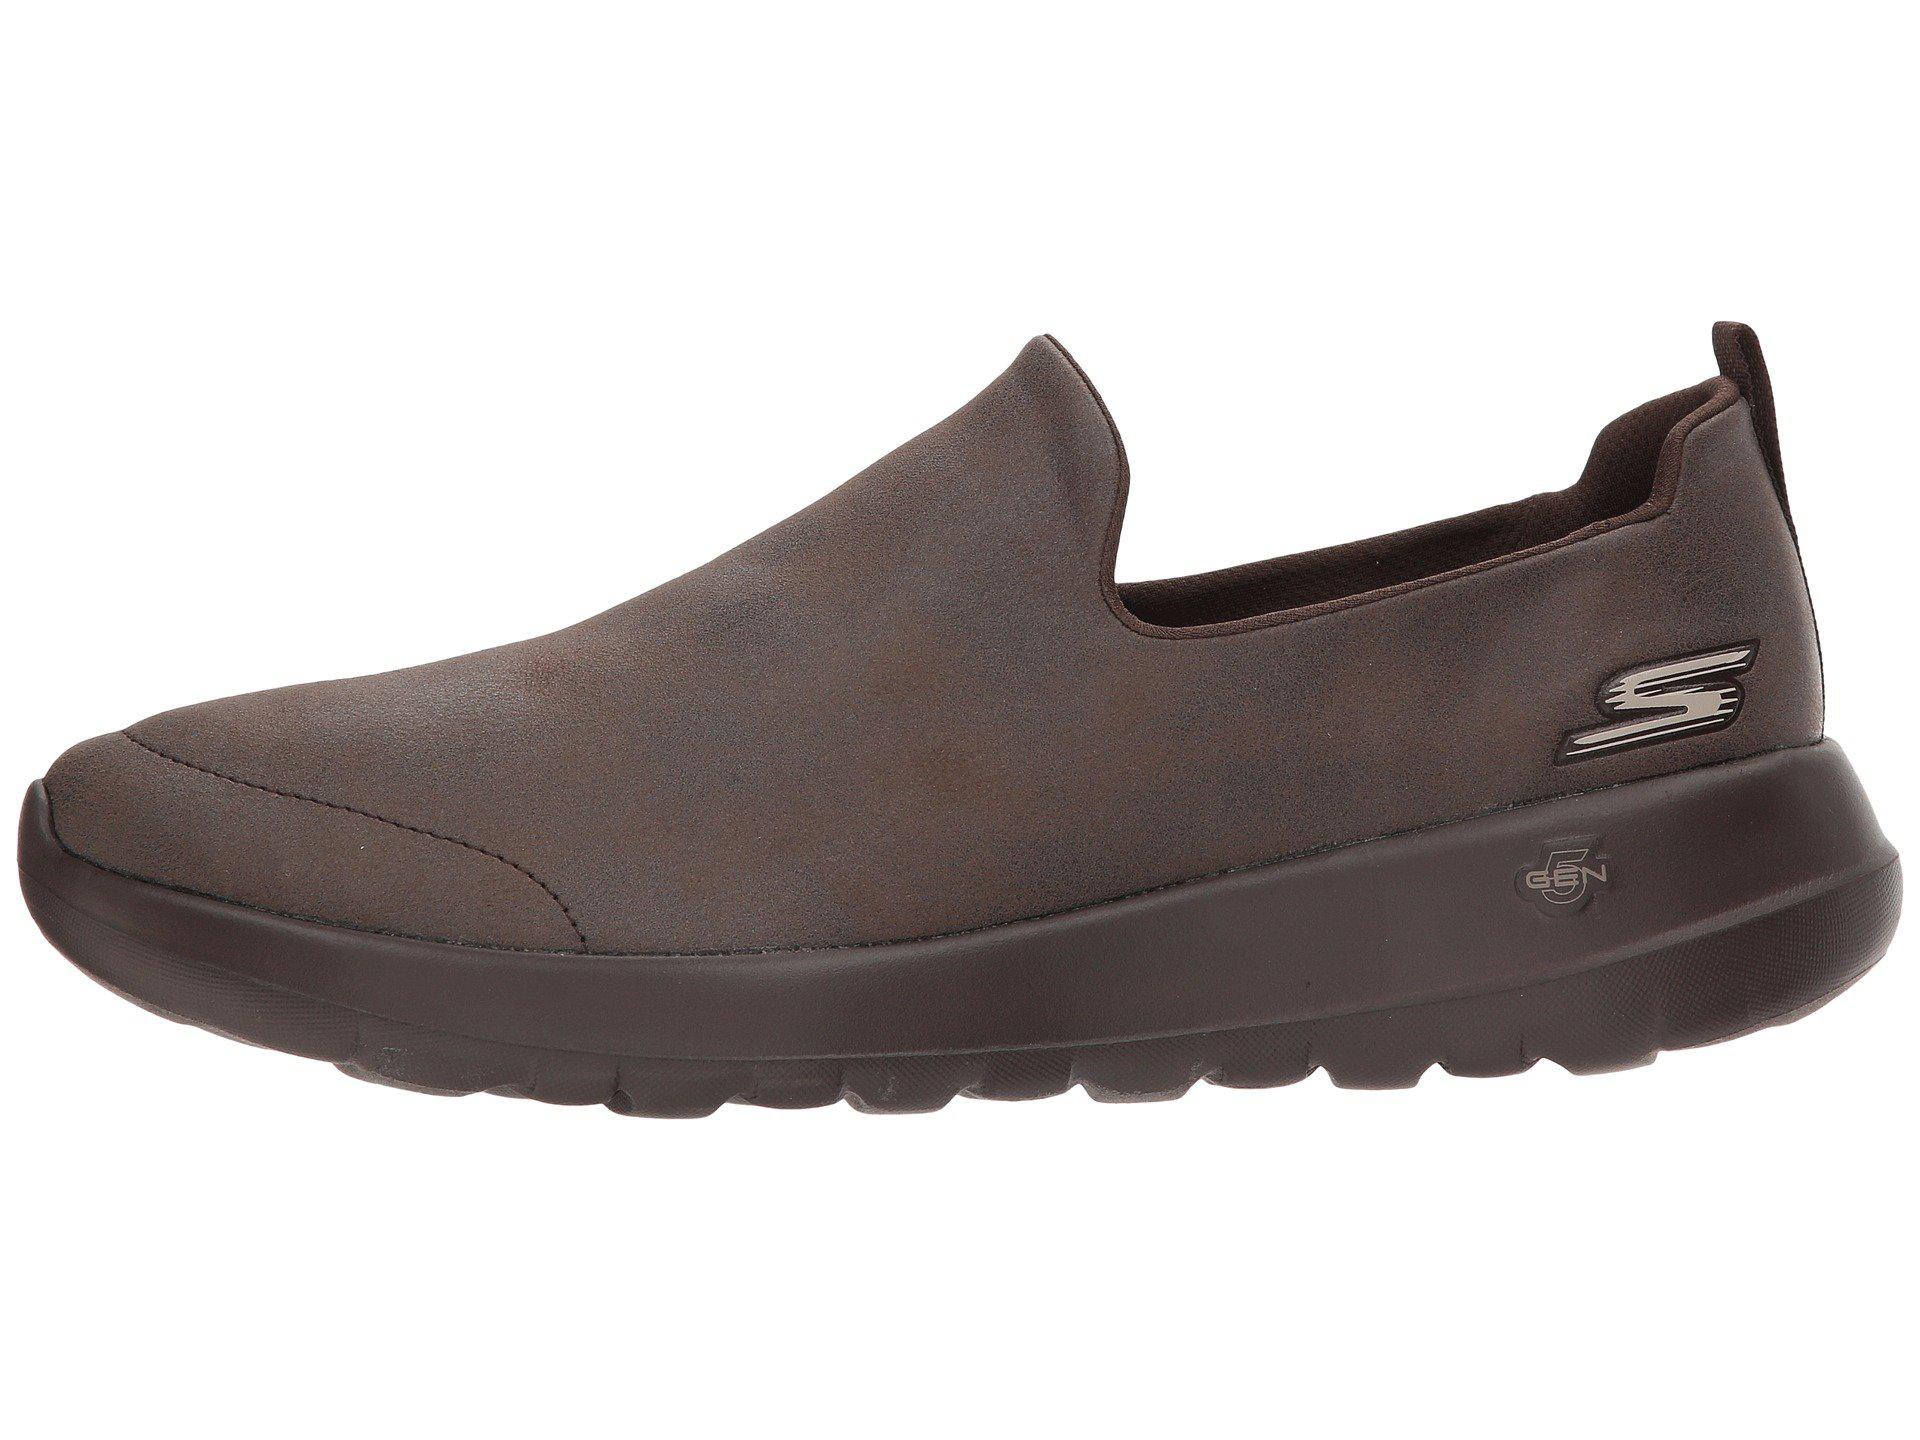 Skechers Leather Gowalk Max - Beyond (chocolate) Men's Slip On Shoes in ...